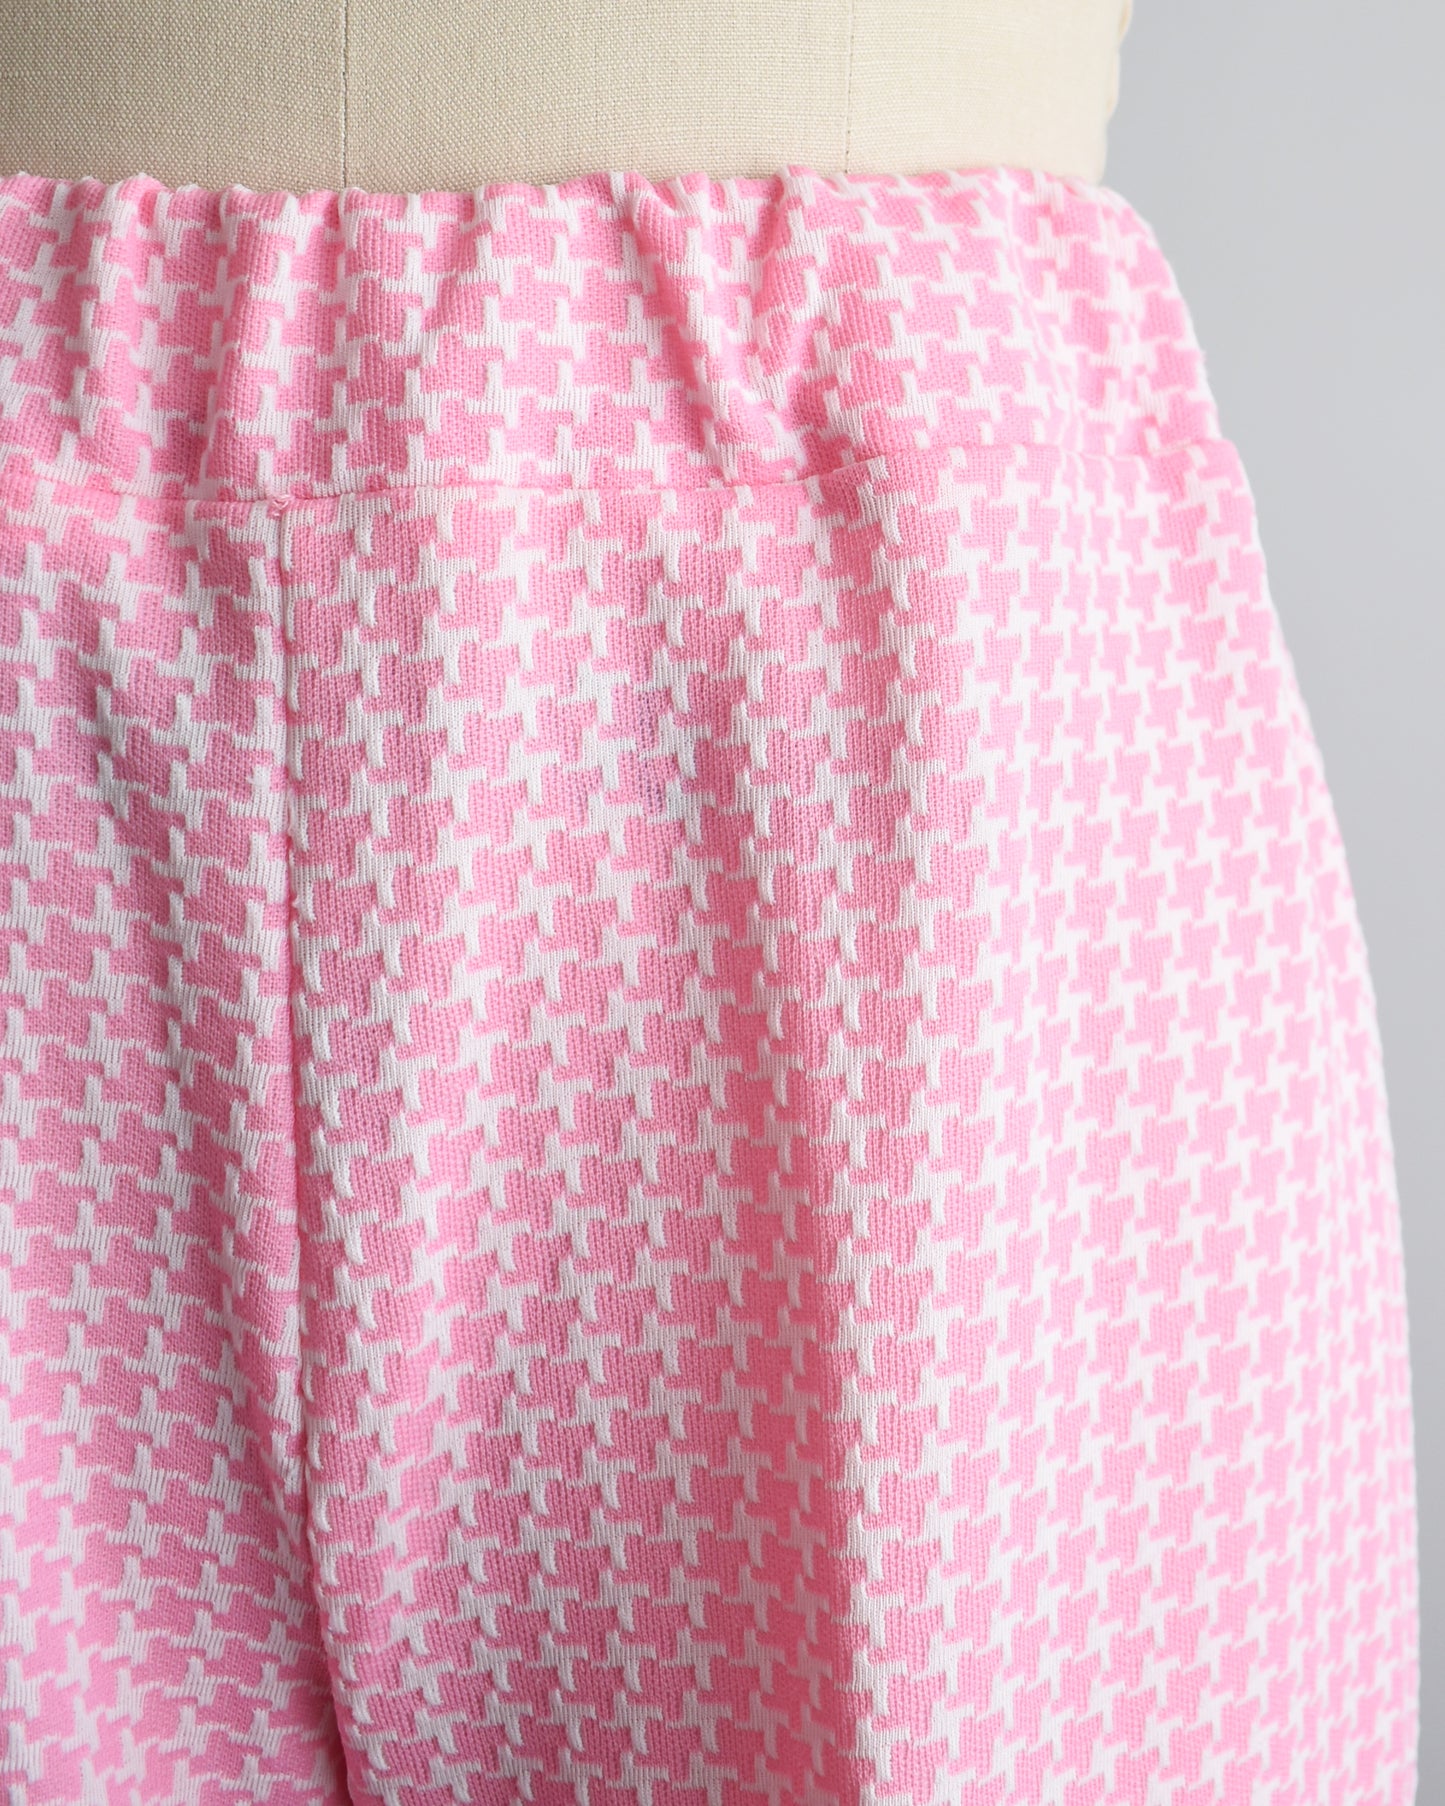 Close up of the elastic waist and houndstooth print on a pair of pink and white vintage 1970s pants